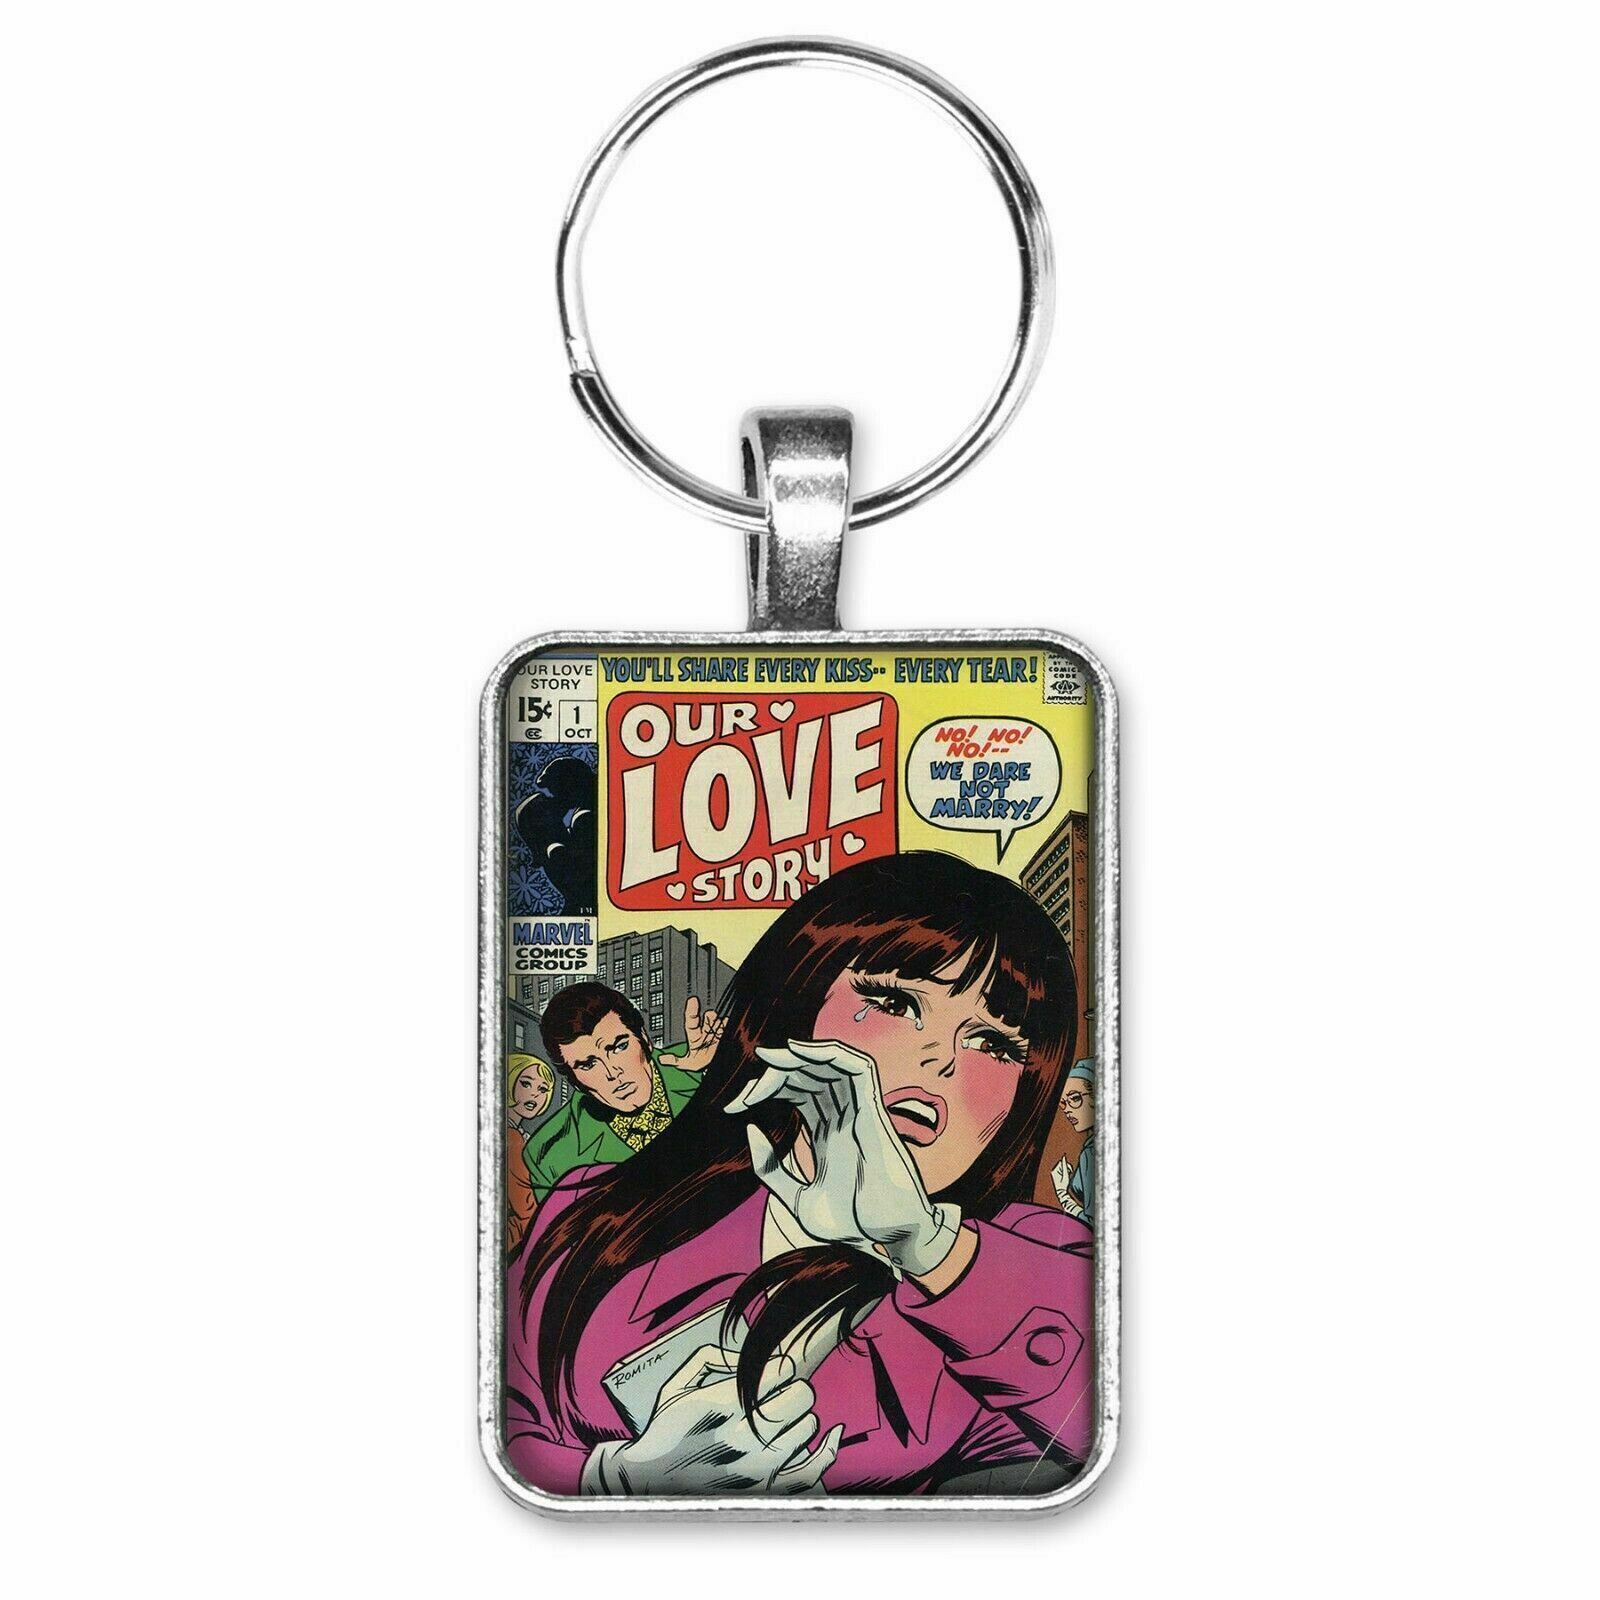 Our Love Story #1 Cover Key Ring or Necklace Classic Romance Comic Book Jewelry